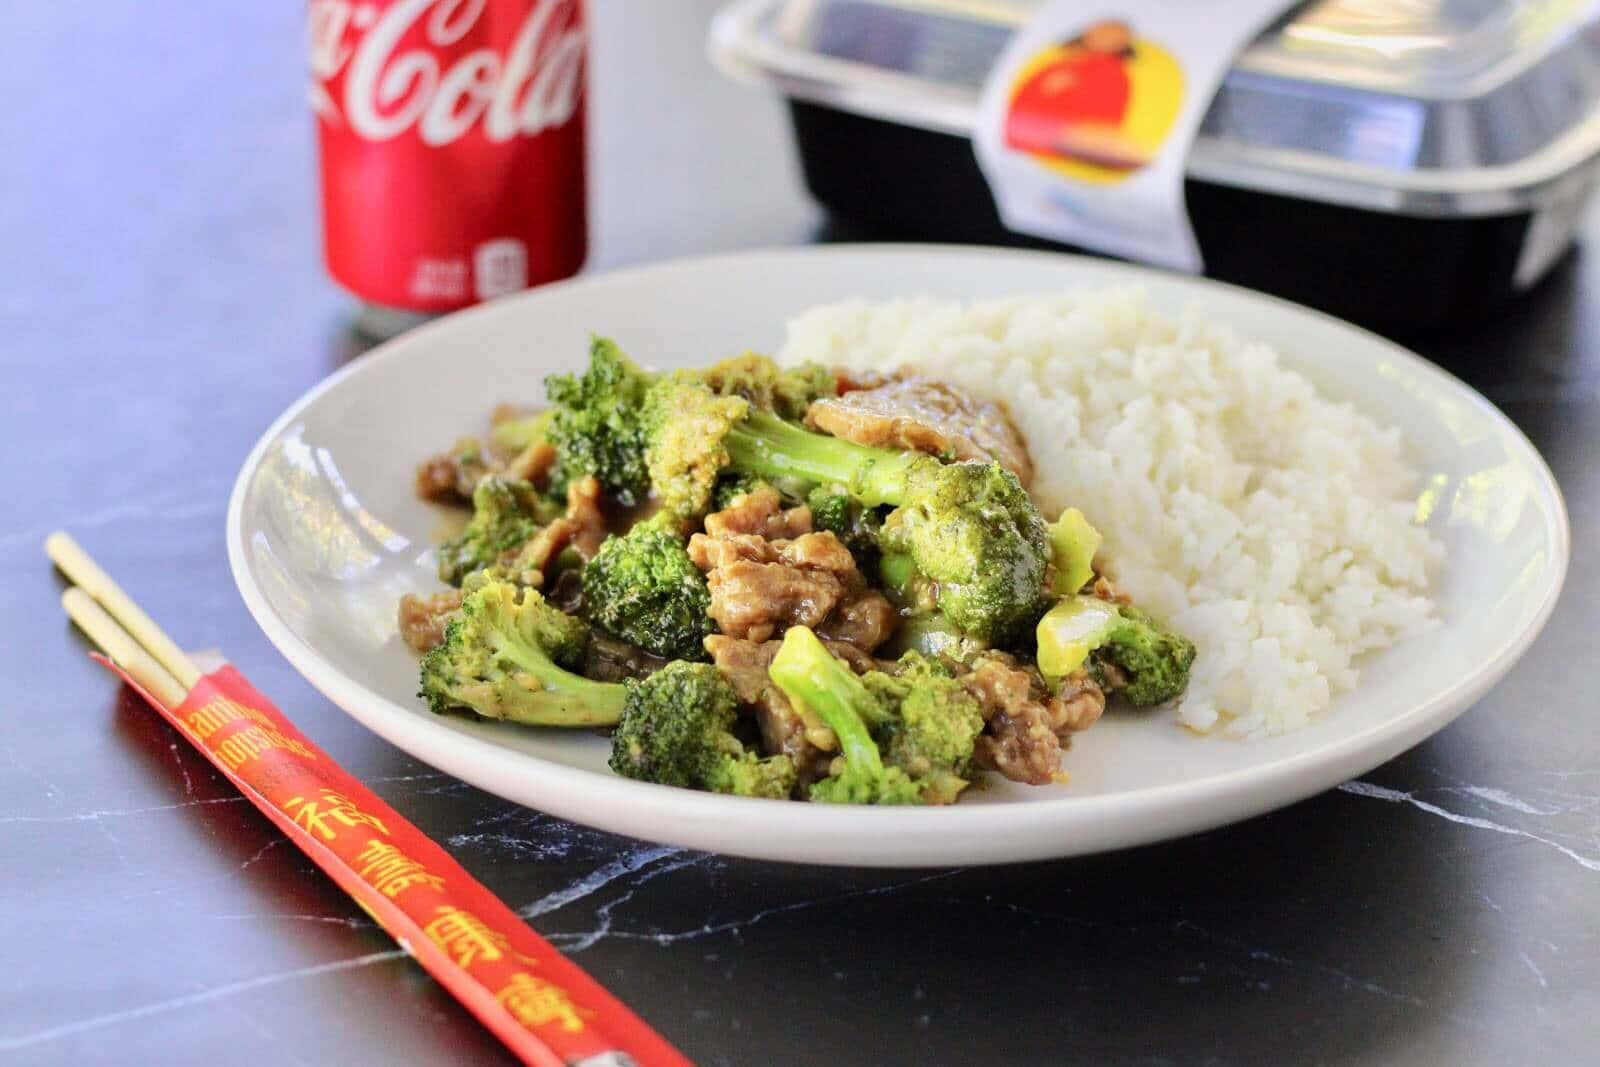 A Plate With Broccoli, Rice And Coke